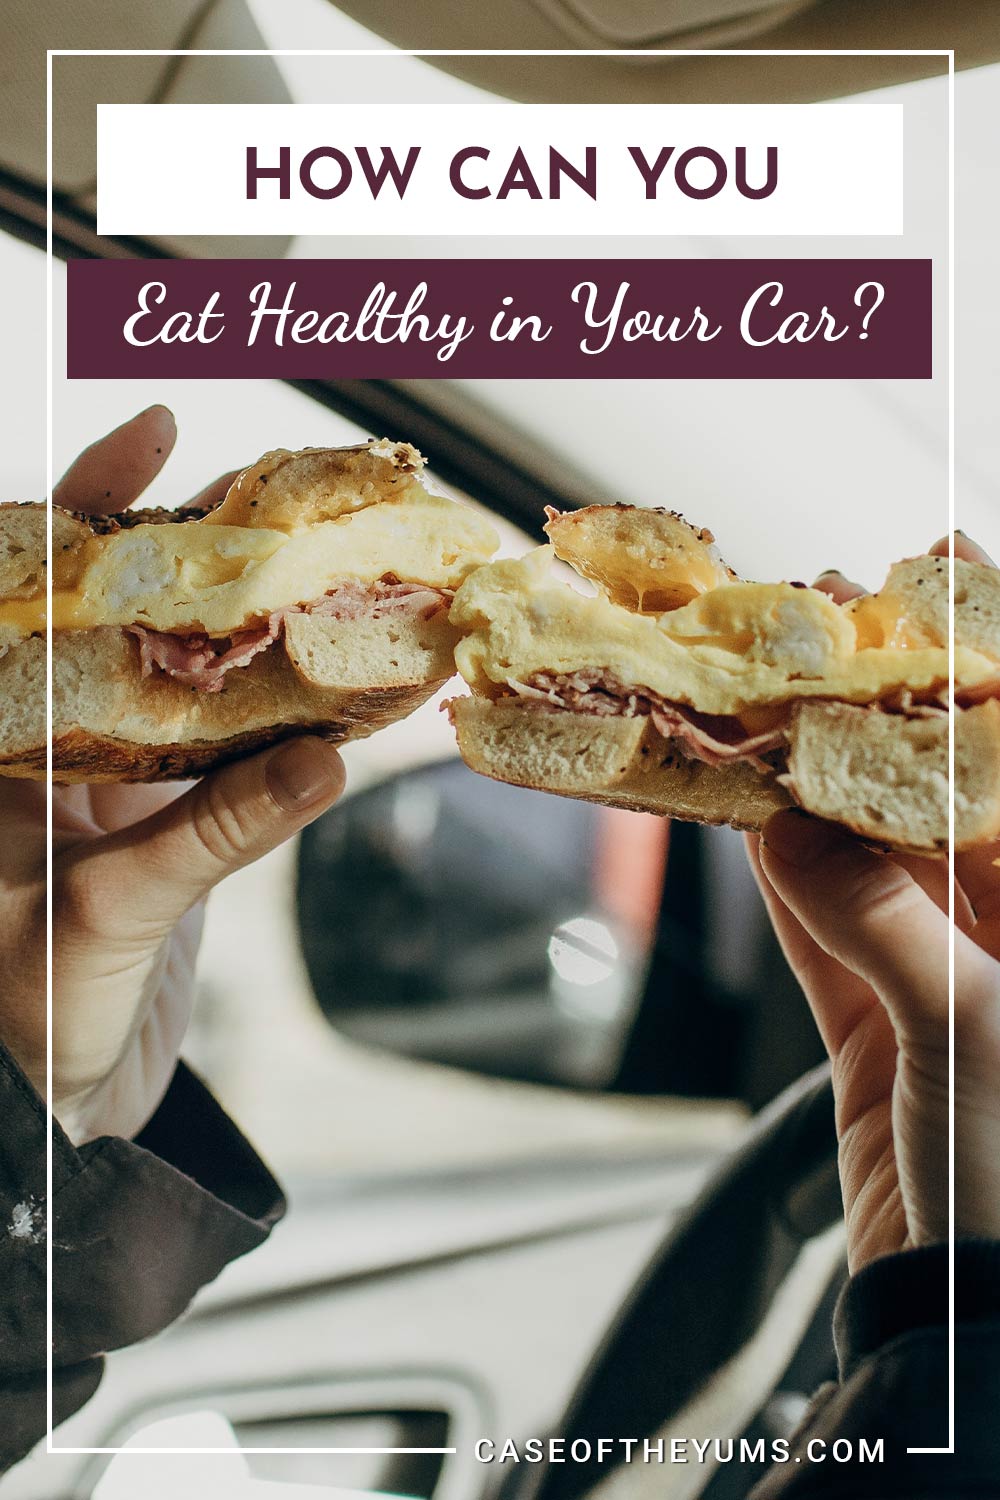 Pieces of a sandwich in hands of a person inside a car - How Can You Eat Healthy in Your Car?